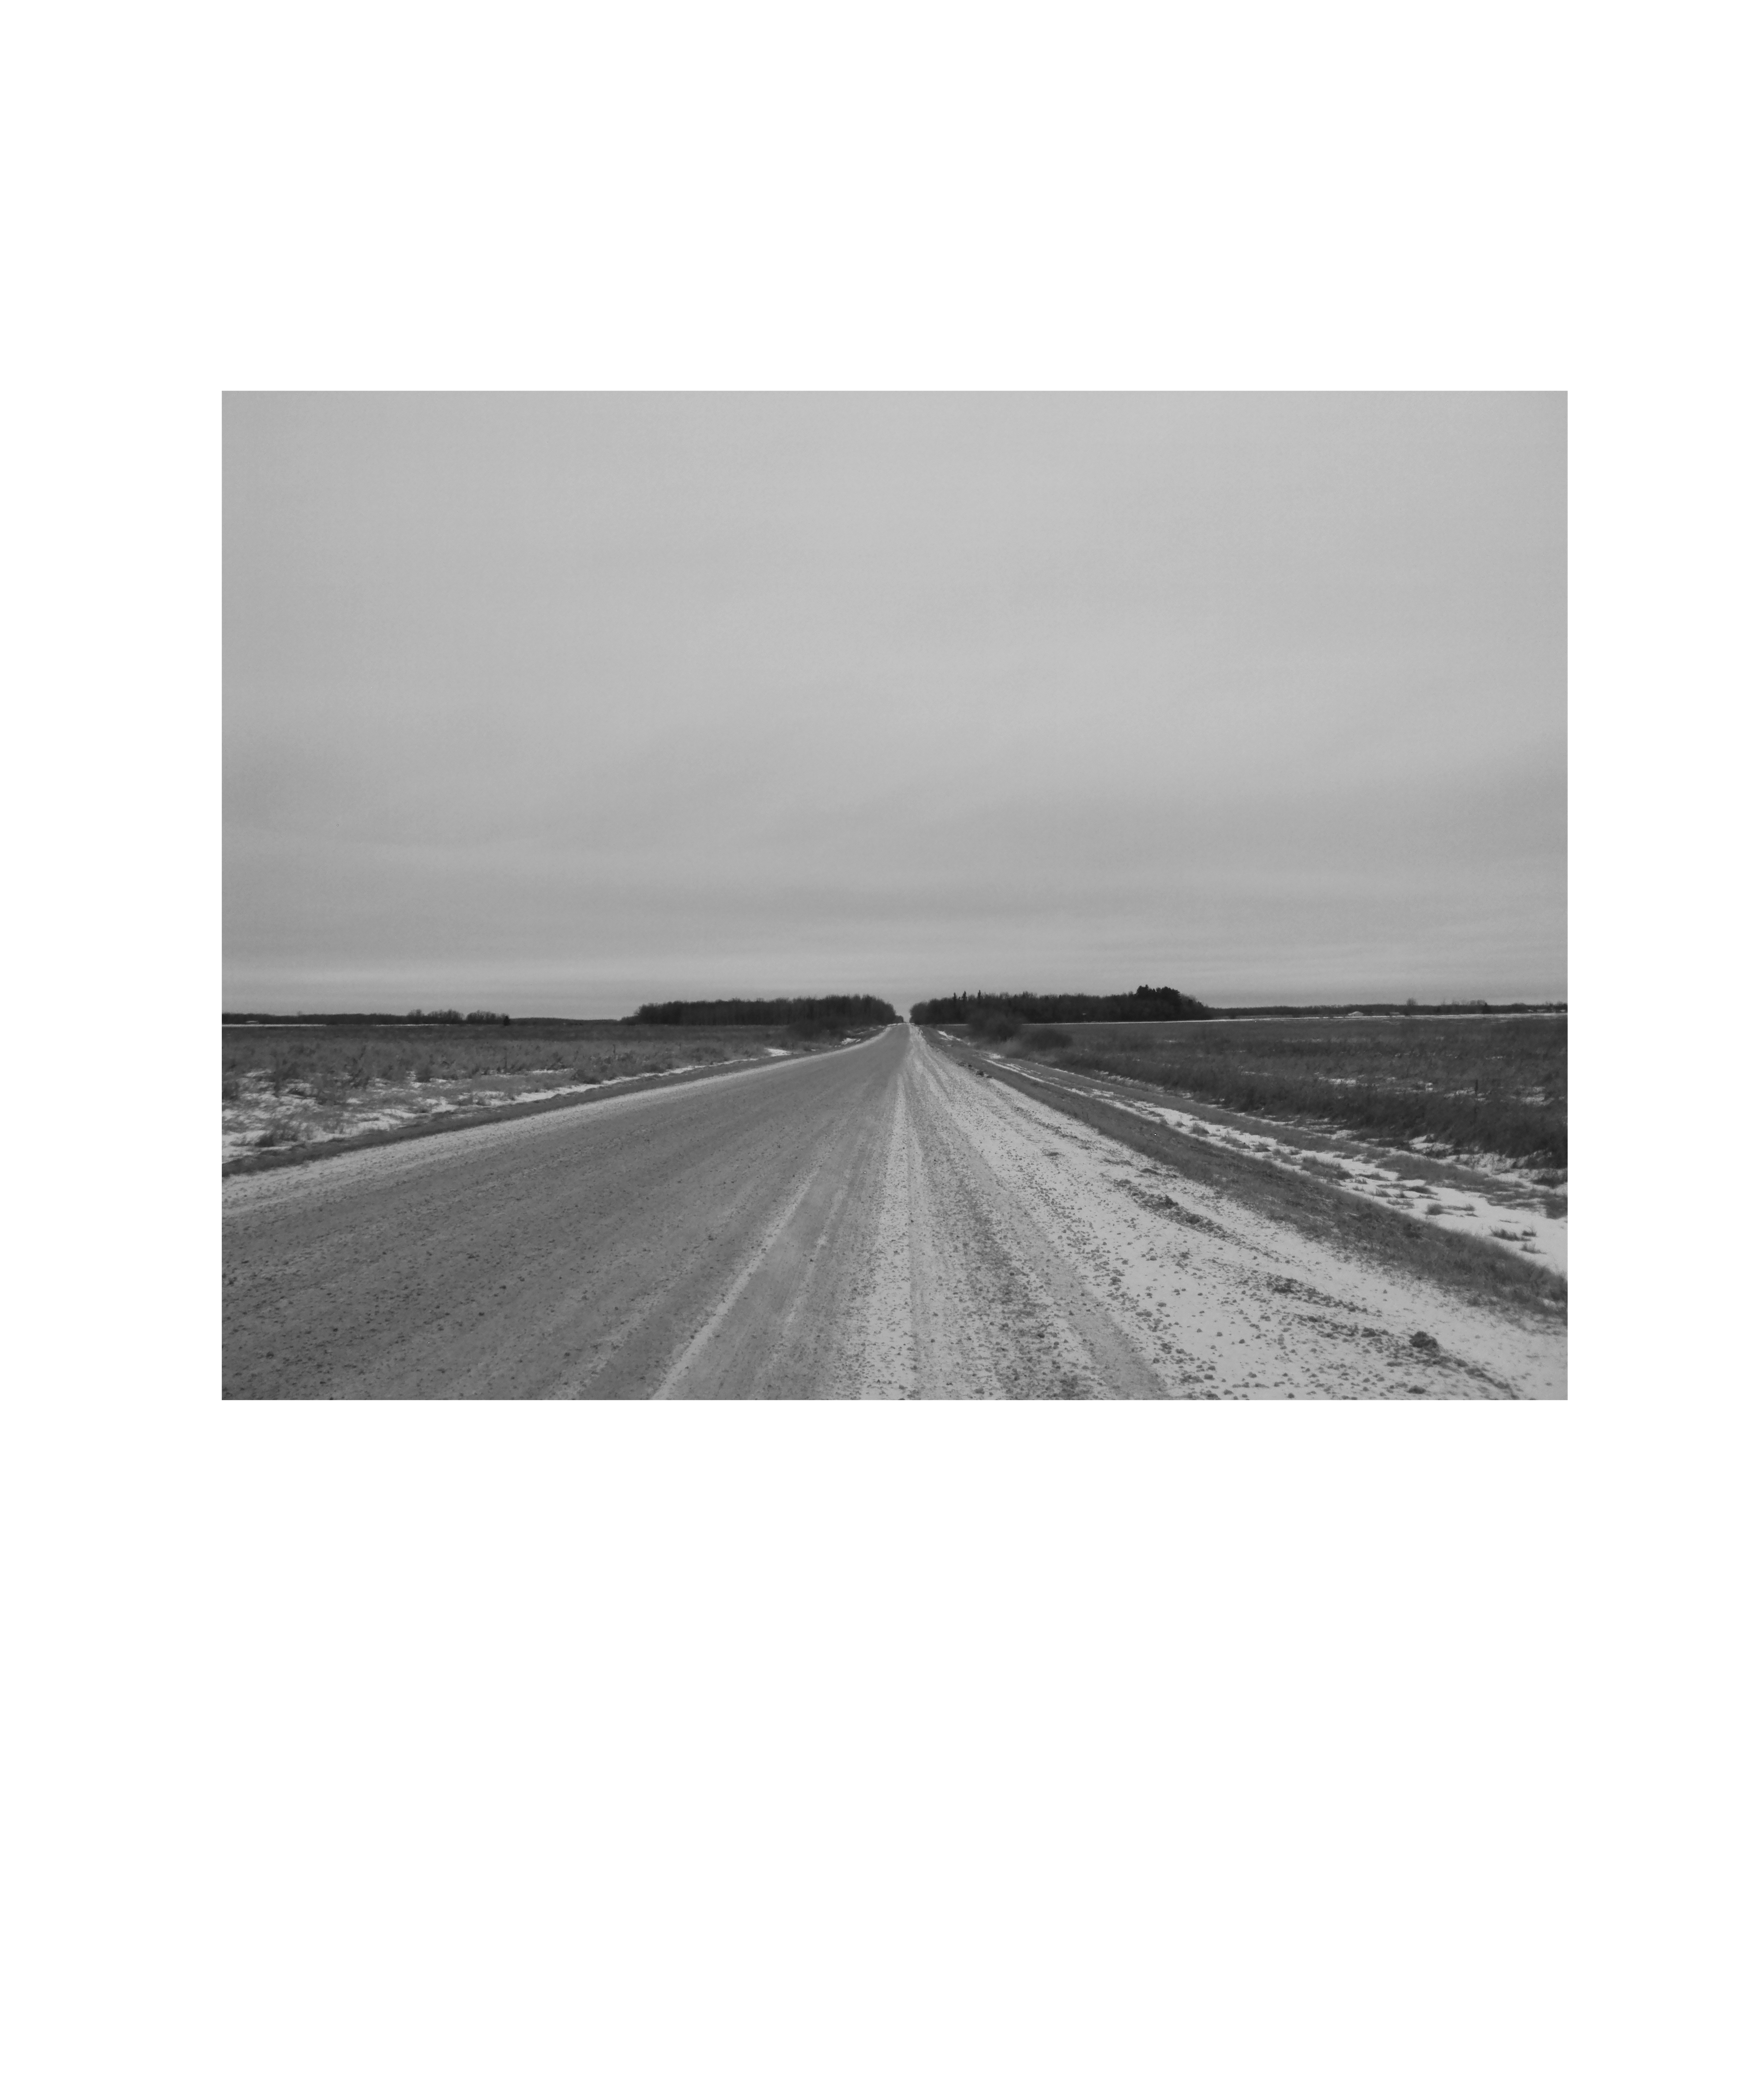 photograph of a country road